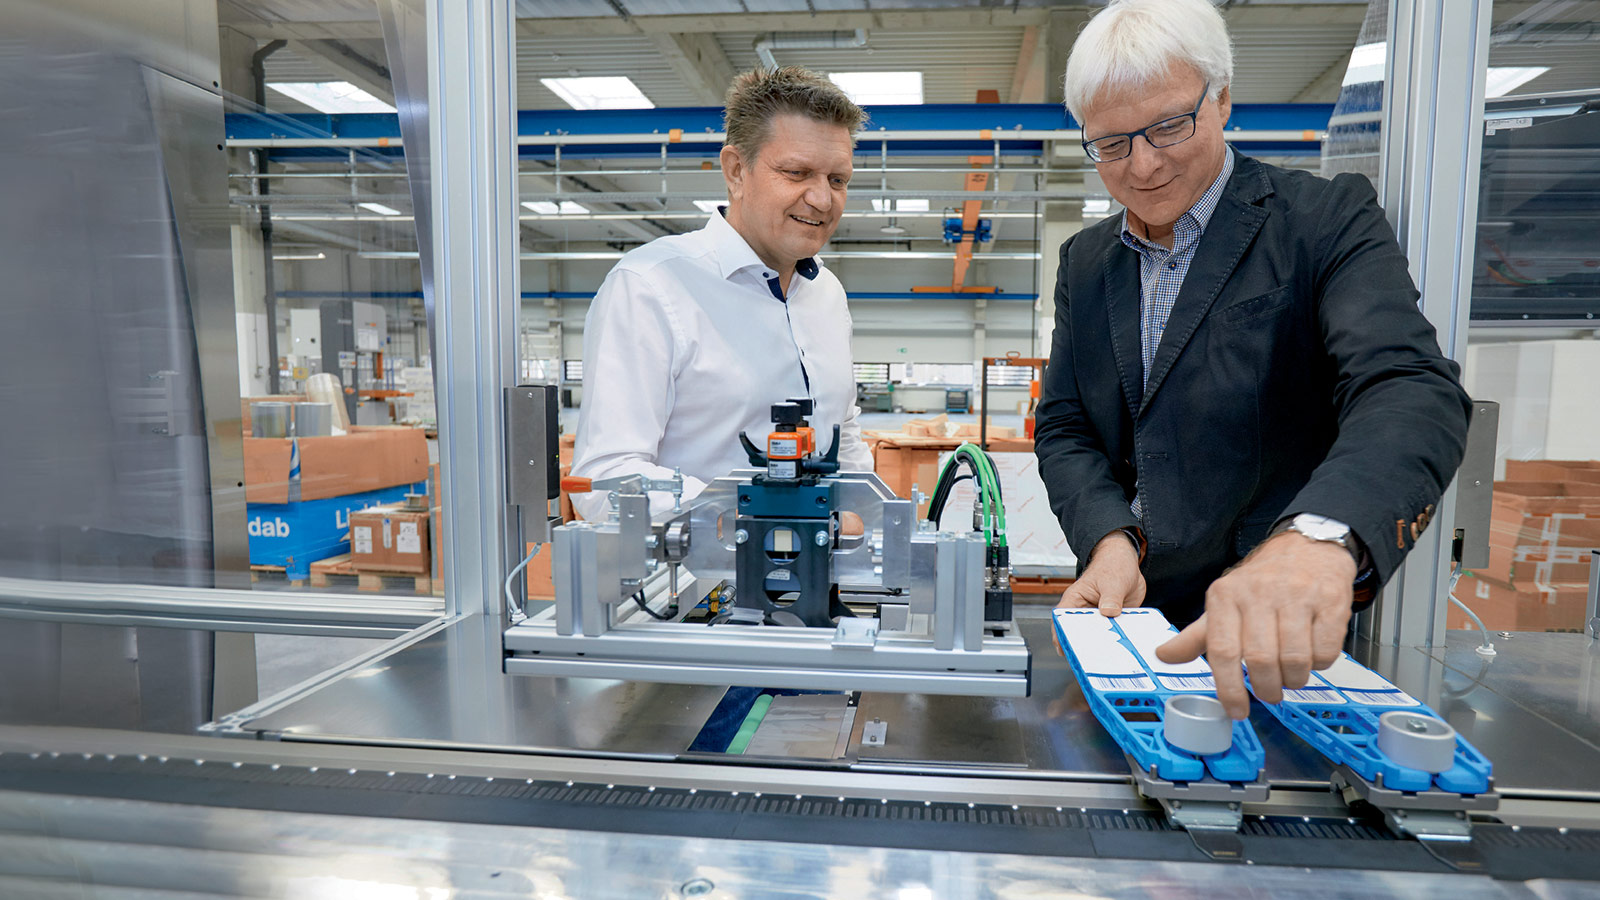 Jürgen Welker (right) of Koch Pac-Systeme shows Frank Würthner of Beckhoff how easy it is to switch out the blister carriers for rapid product changeovers.  